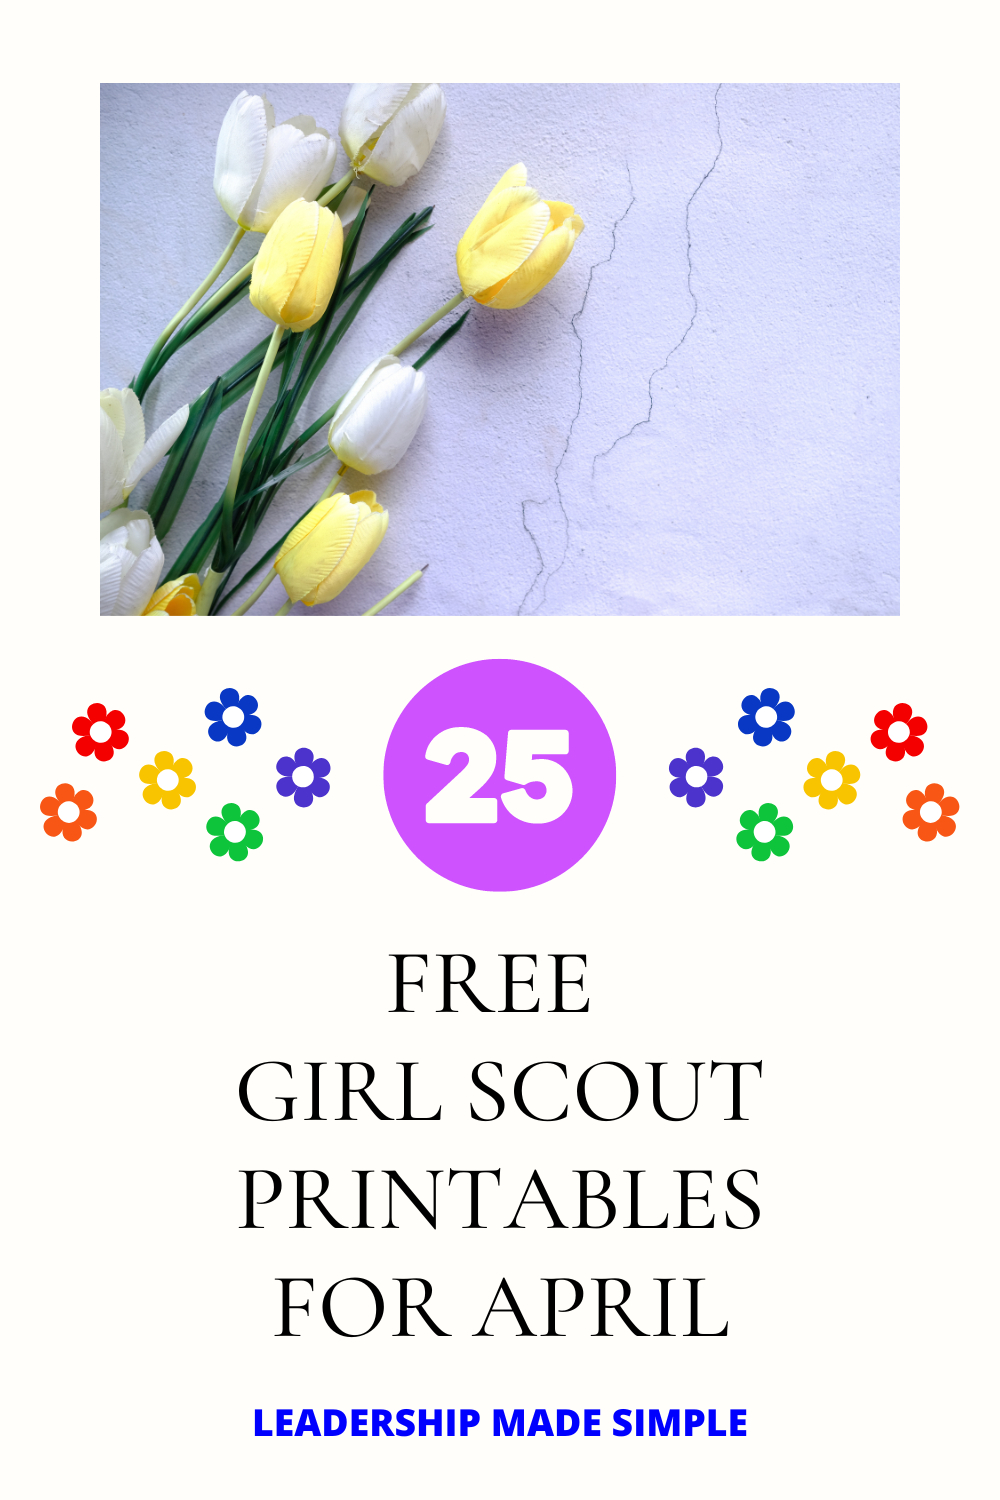 25 Free Girl Scout Printables For April - Troop Leader inside Free Daisy Girl Scout Printables